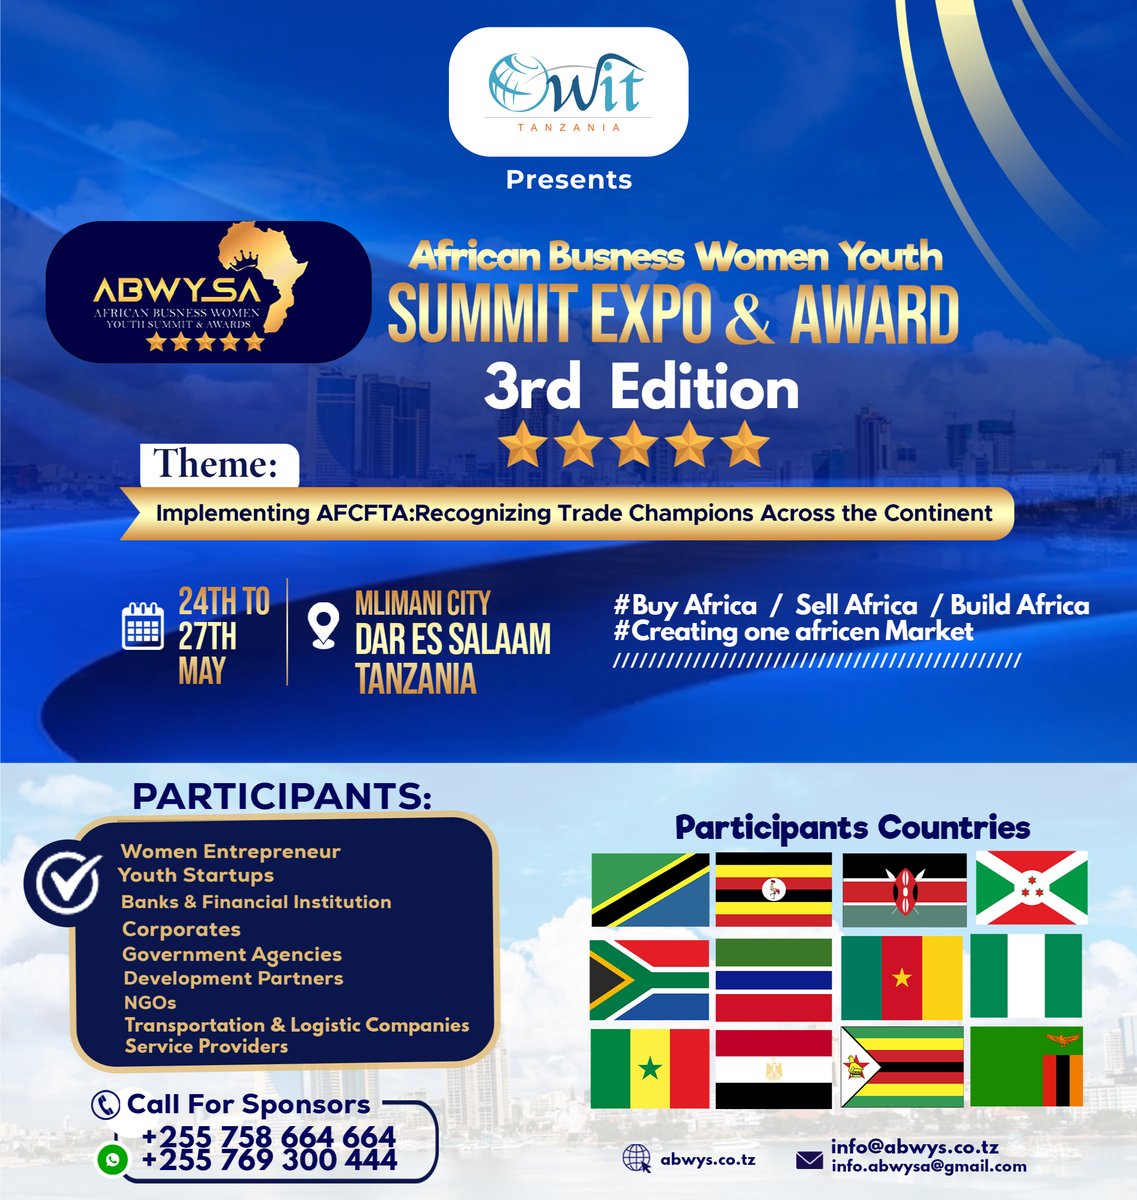 Join us at the AFCFTA to Recognizing Trade Champions Across the Continent! Participants include Women Entrepreneurs, Youth Startups, Banks, Corporations, Government Agencies, NGOs, and more. Let's #BuildAfrica.